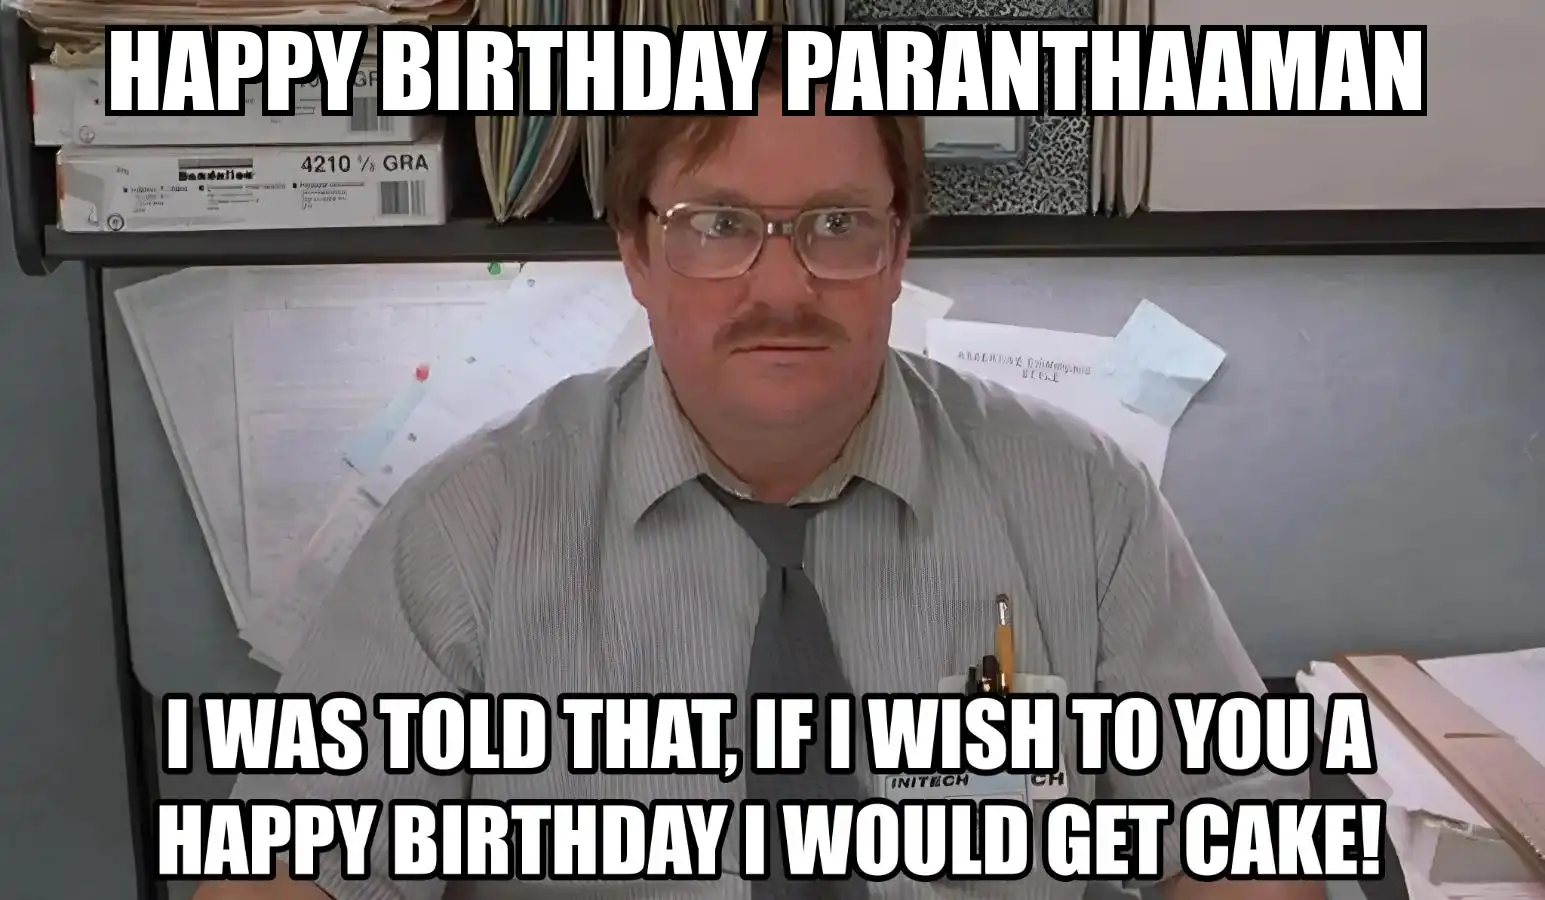 Happy Birthday Paranthaaman I Would Get A Cake Meme